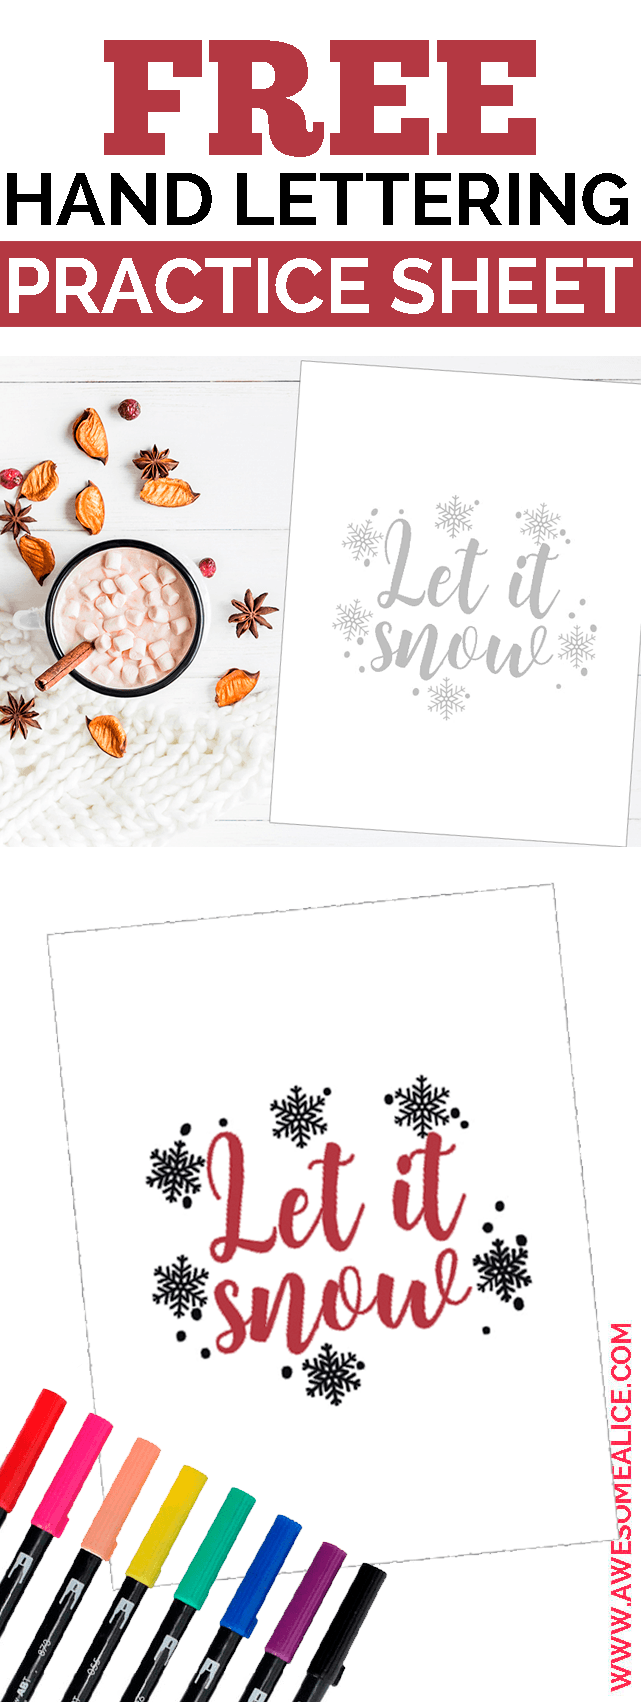 Winter Themed Brush Lettering Worksheet You Need To Practice